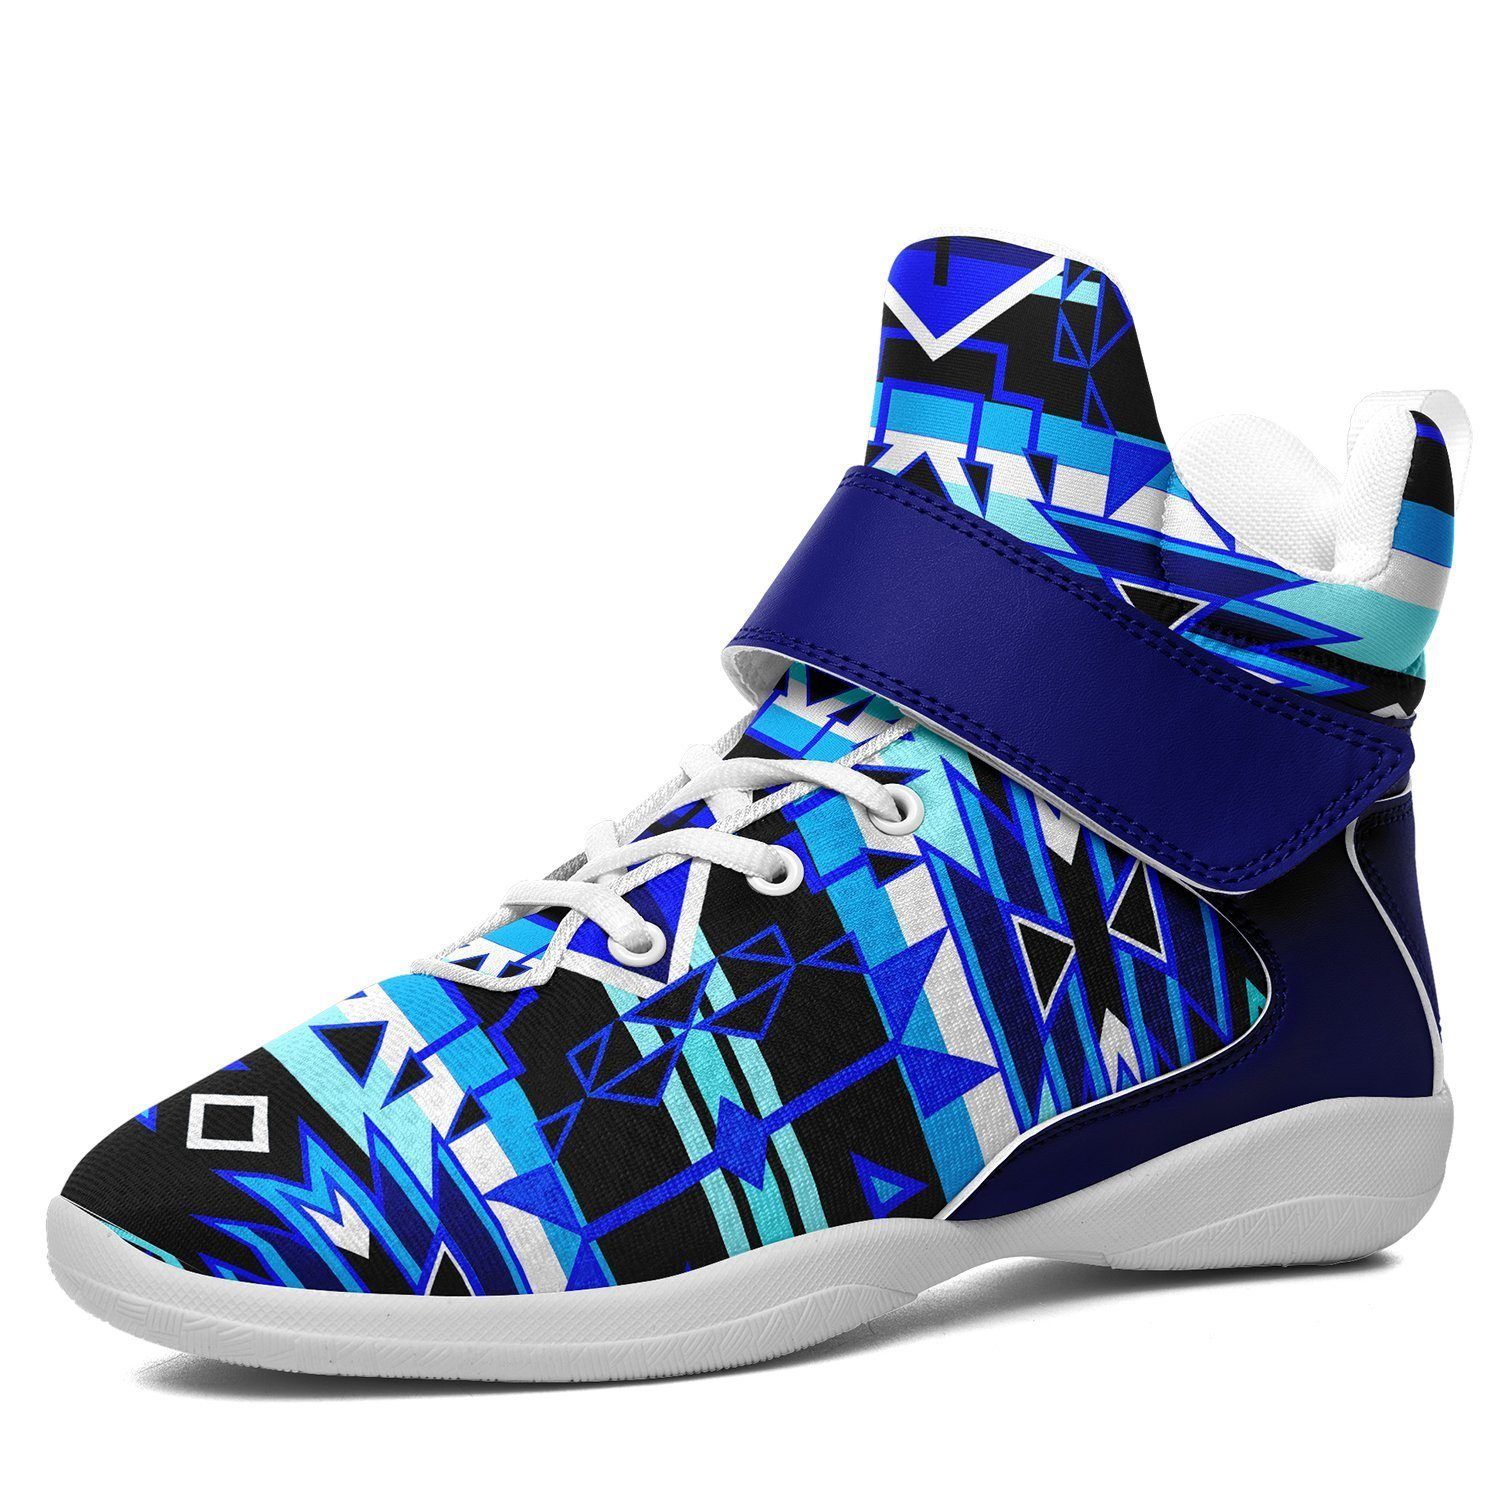 Force of Nature Winter Night Kid's Ipottaa Basketball / Sport High Top Shoes 49 Dzine US Child 12.5 / EUR 30 White Sole with Blue Strap 